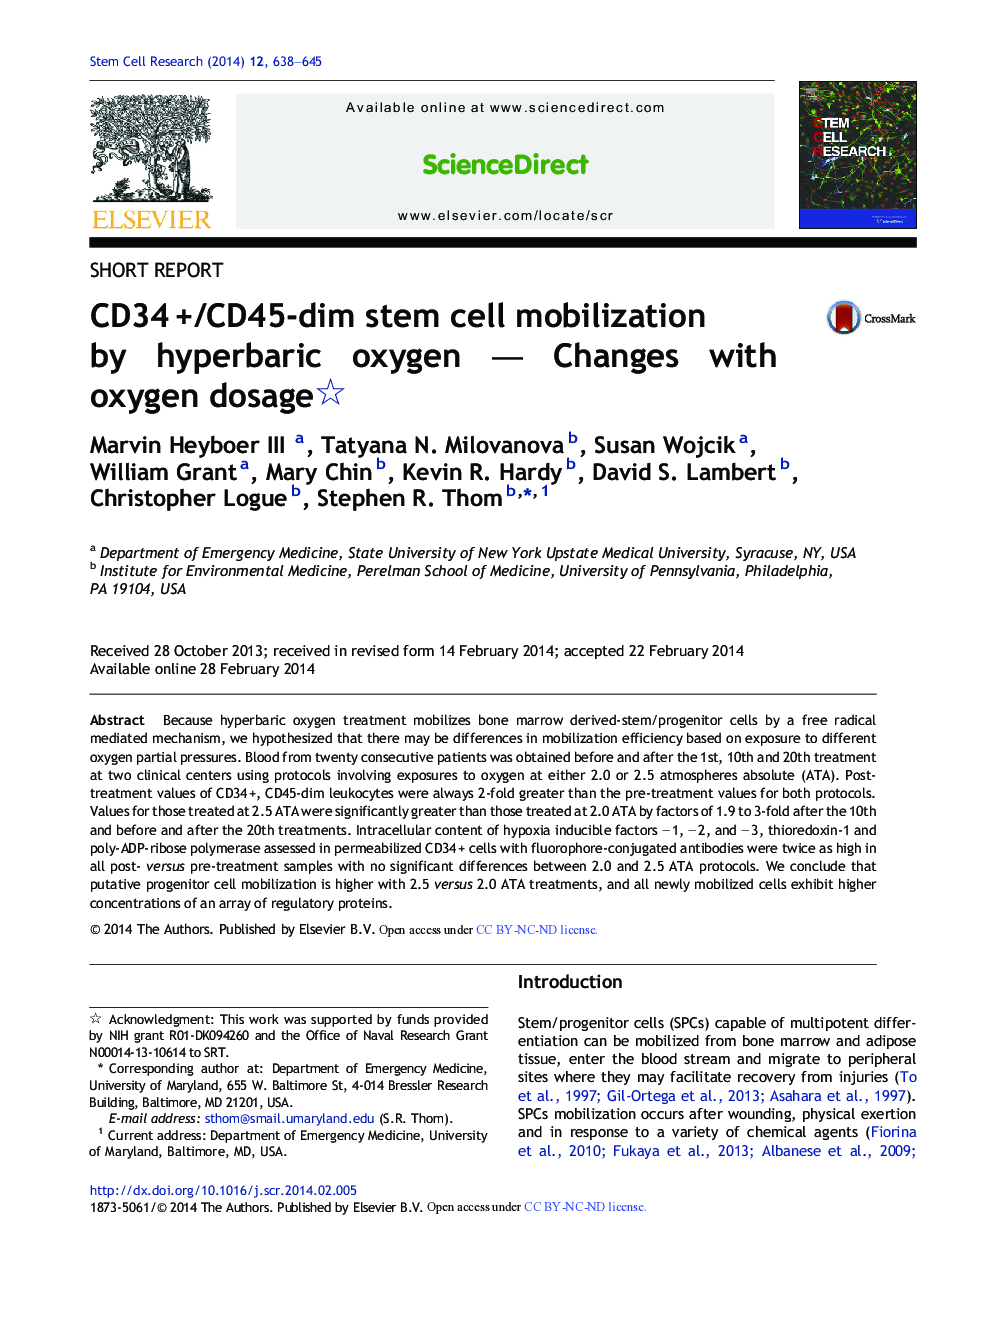 CD34 +/CD45-dim stem cell mobilization by hyperbaric oxygen — Changes with oxygen dosage 